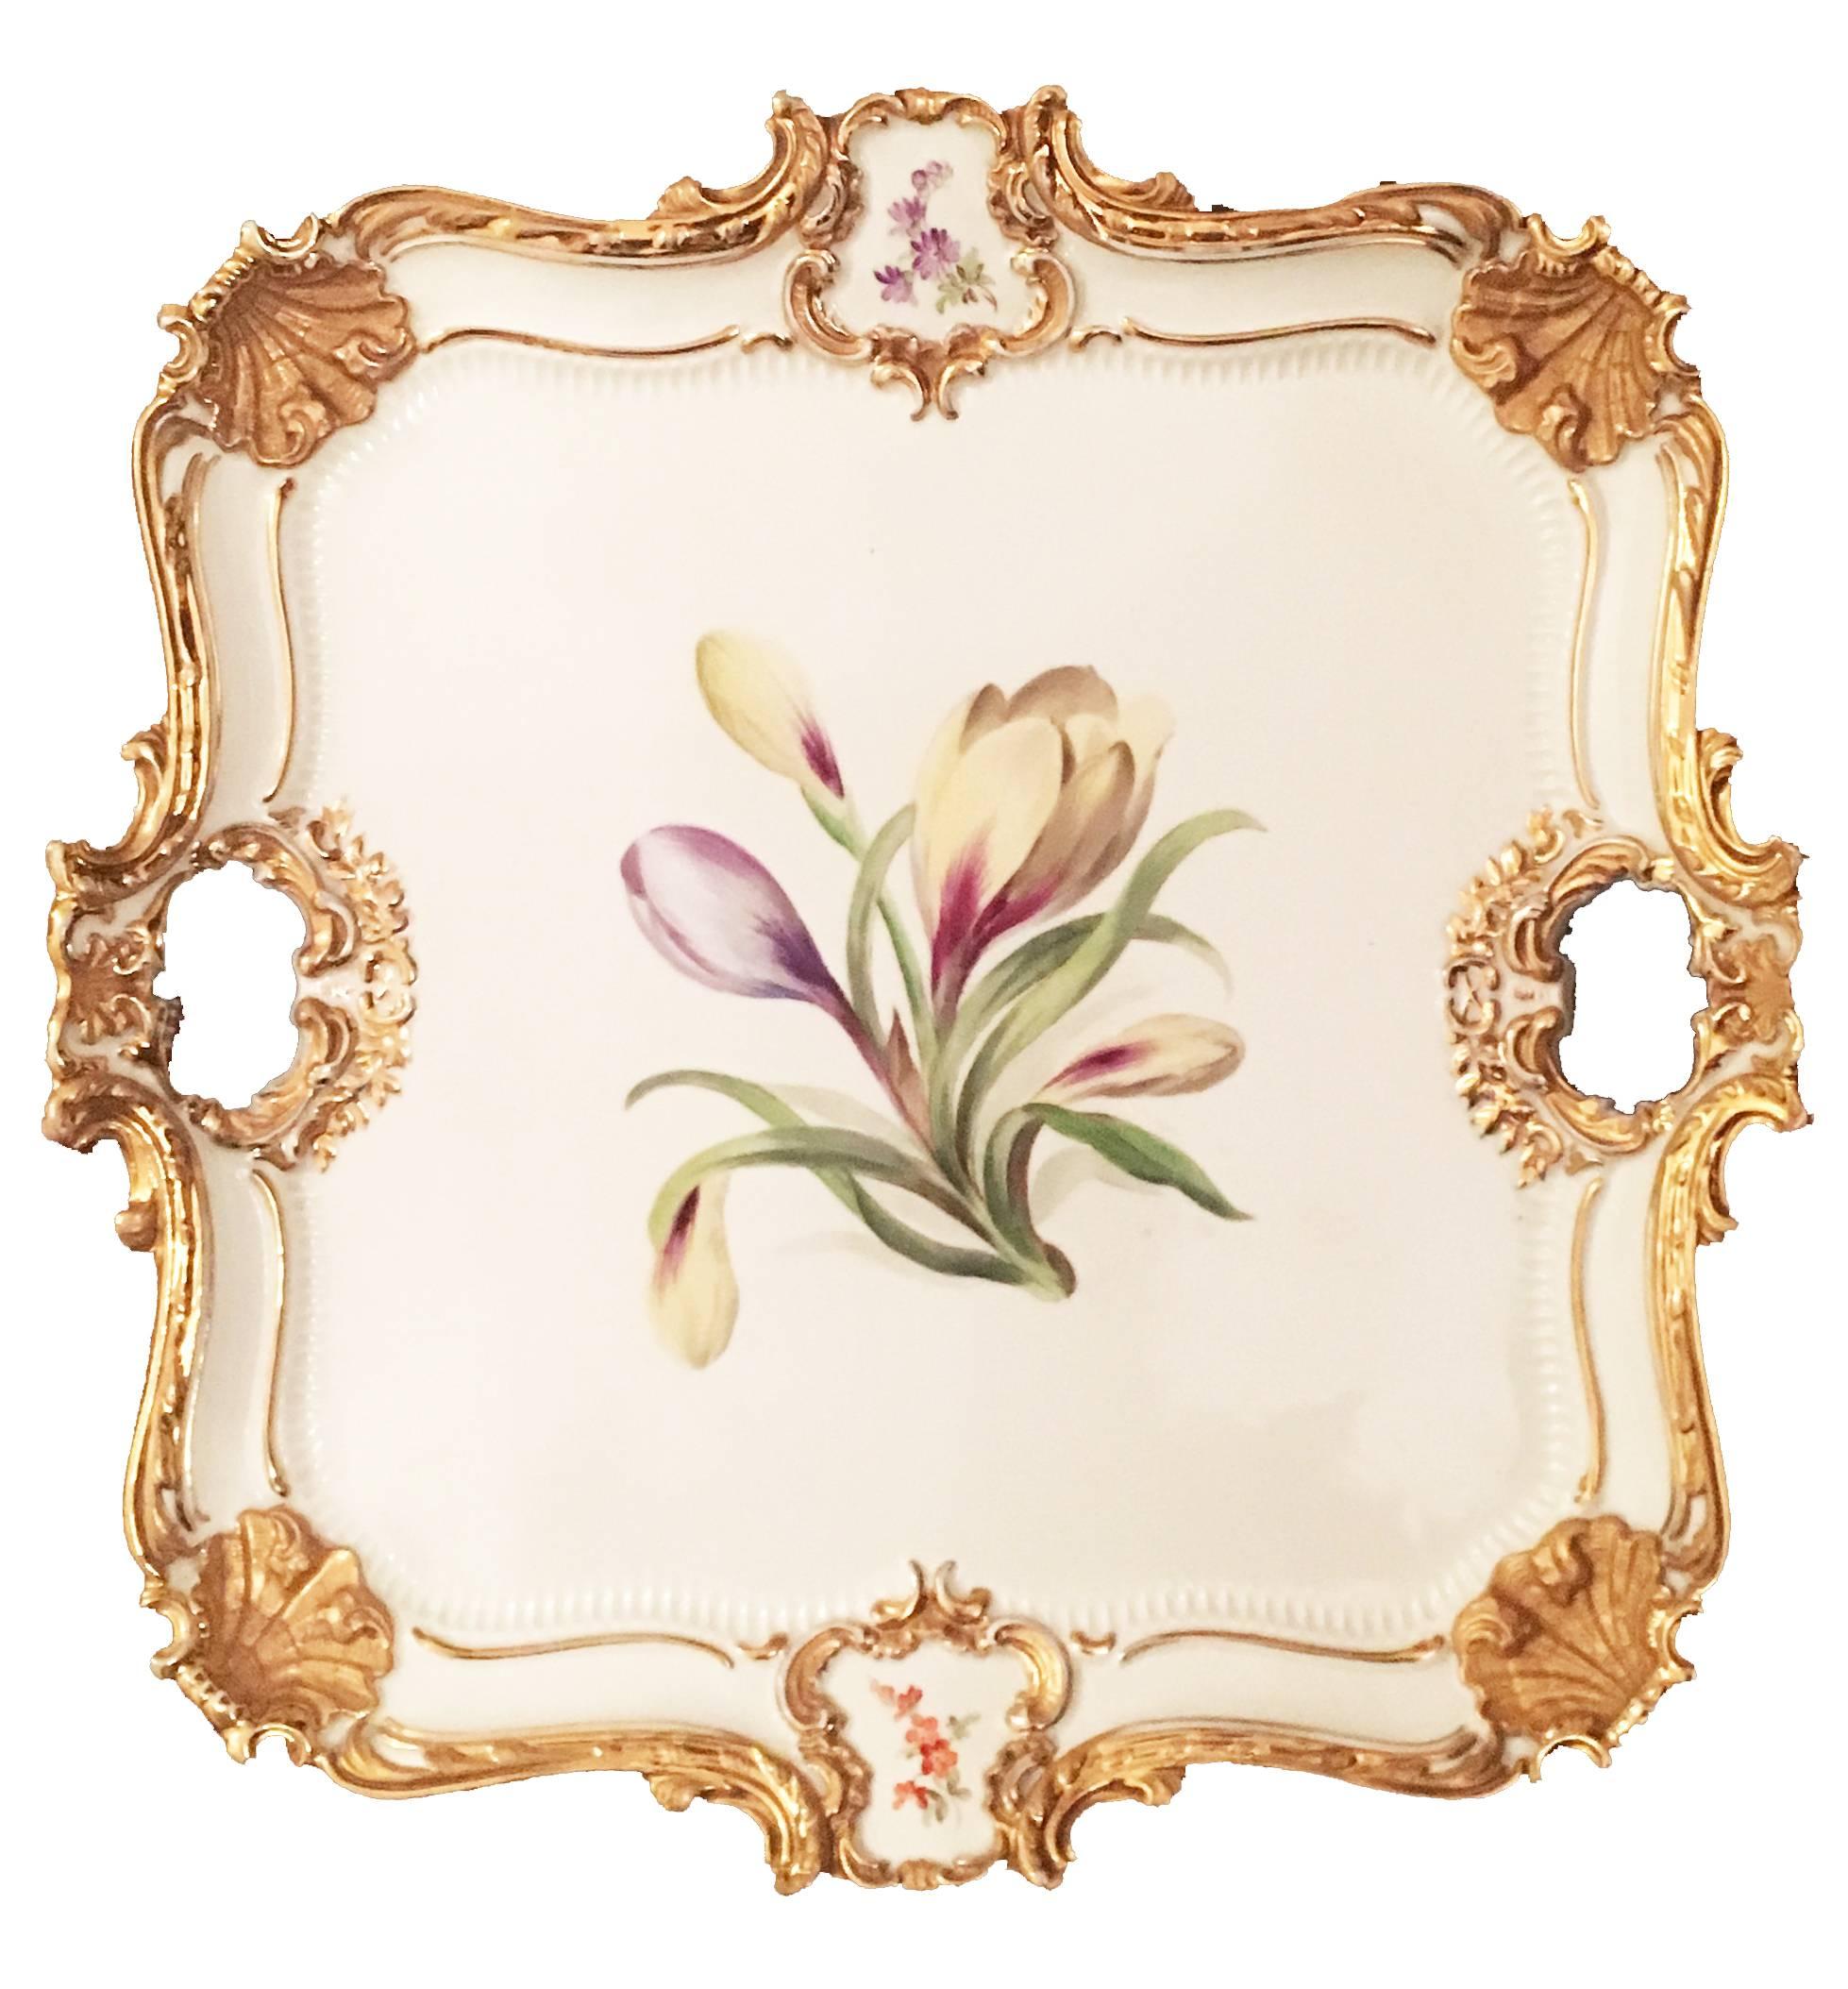 German Meissen Porcelain Rococo-style square tray the scrolling and shell-molded edge with two handles cut-out to the sides, painted with heavy gilt details, centring a life-sized specimen of a blooming crocus flower with extensive leafing